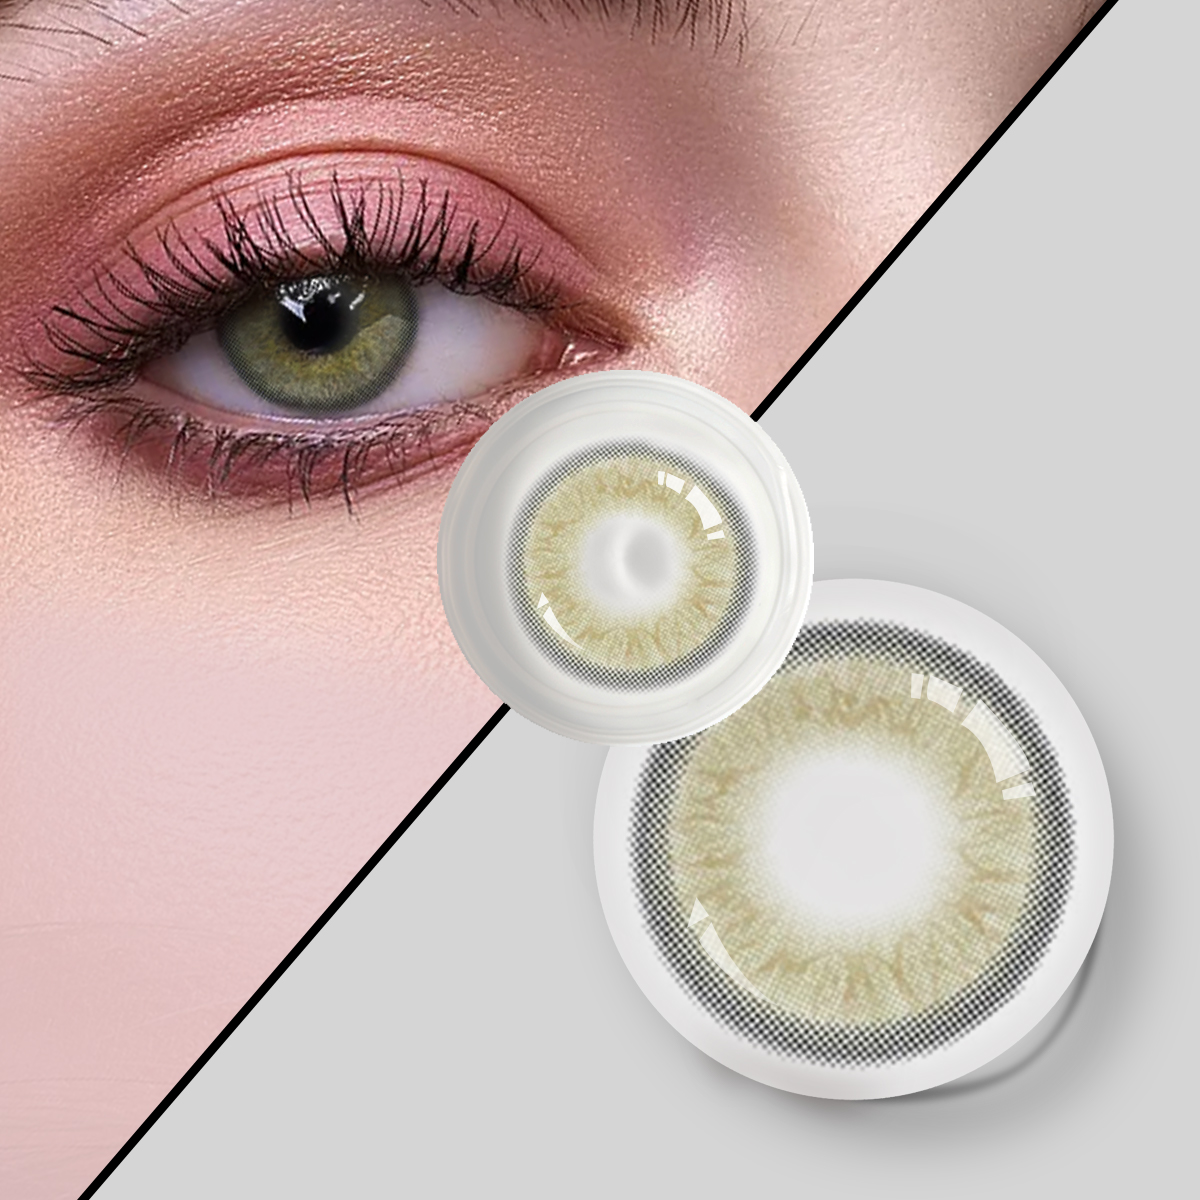 DBeyes case Packing Contact Lenses Fashion Color Soft Contact Lens Contact lenses For Eyes